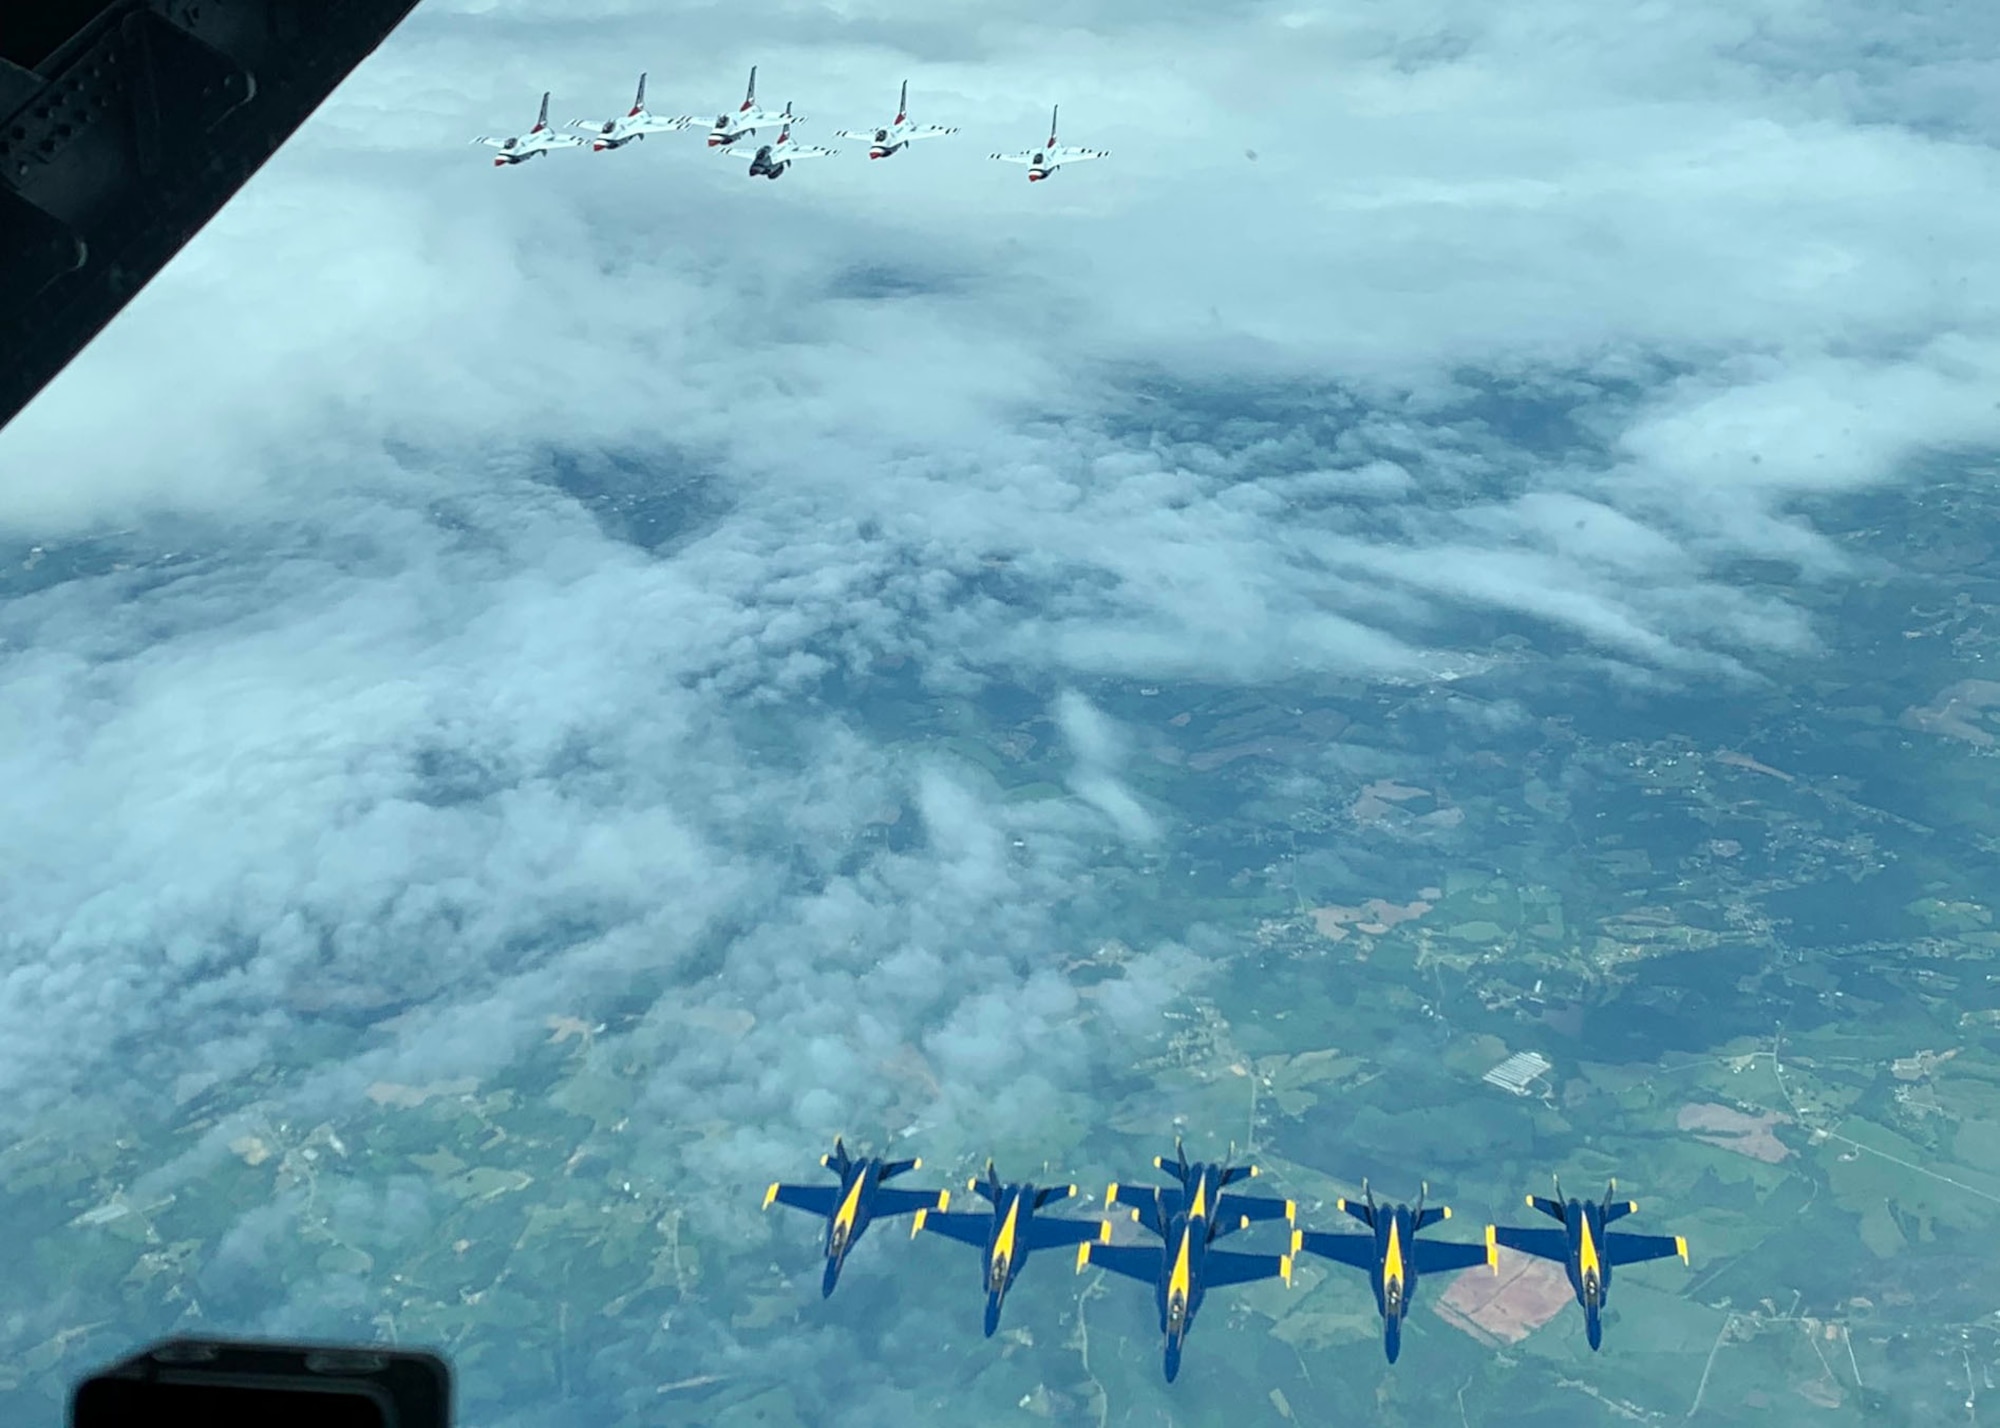 The U.S. Air Force Thunderbirds and U.S. Navy Blue Angels flew in formation behind a KC-10 Extender assigned to Joint Base McGuire-Dix-Lakehurst, N.J., April 28, 2020. The demonstration teams flew over New York, New Jersey and Pennsylvania to honor thousands of healthcare workers, essential employees, military personnel and other first responders who are at the front lines of the battle against COVID-19. (U.S. Air Force photo by Chief Master Sgt. Christopher Ottenwess)